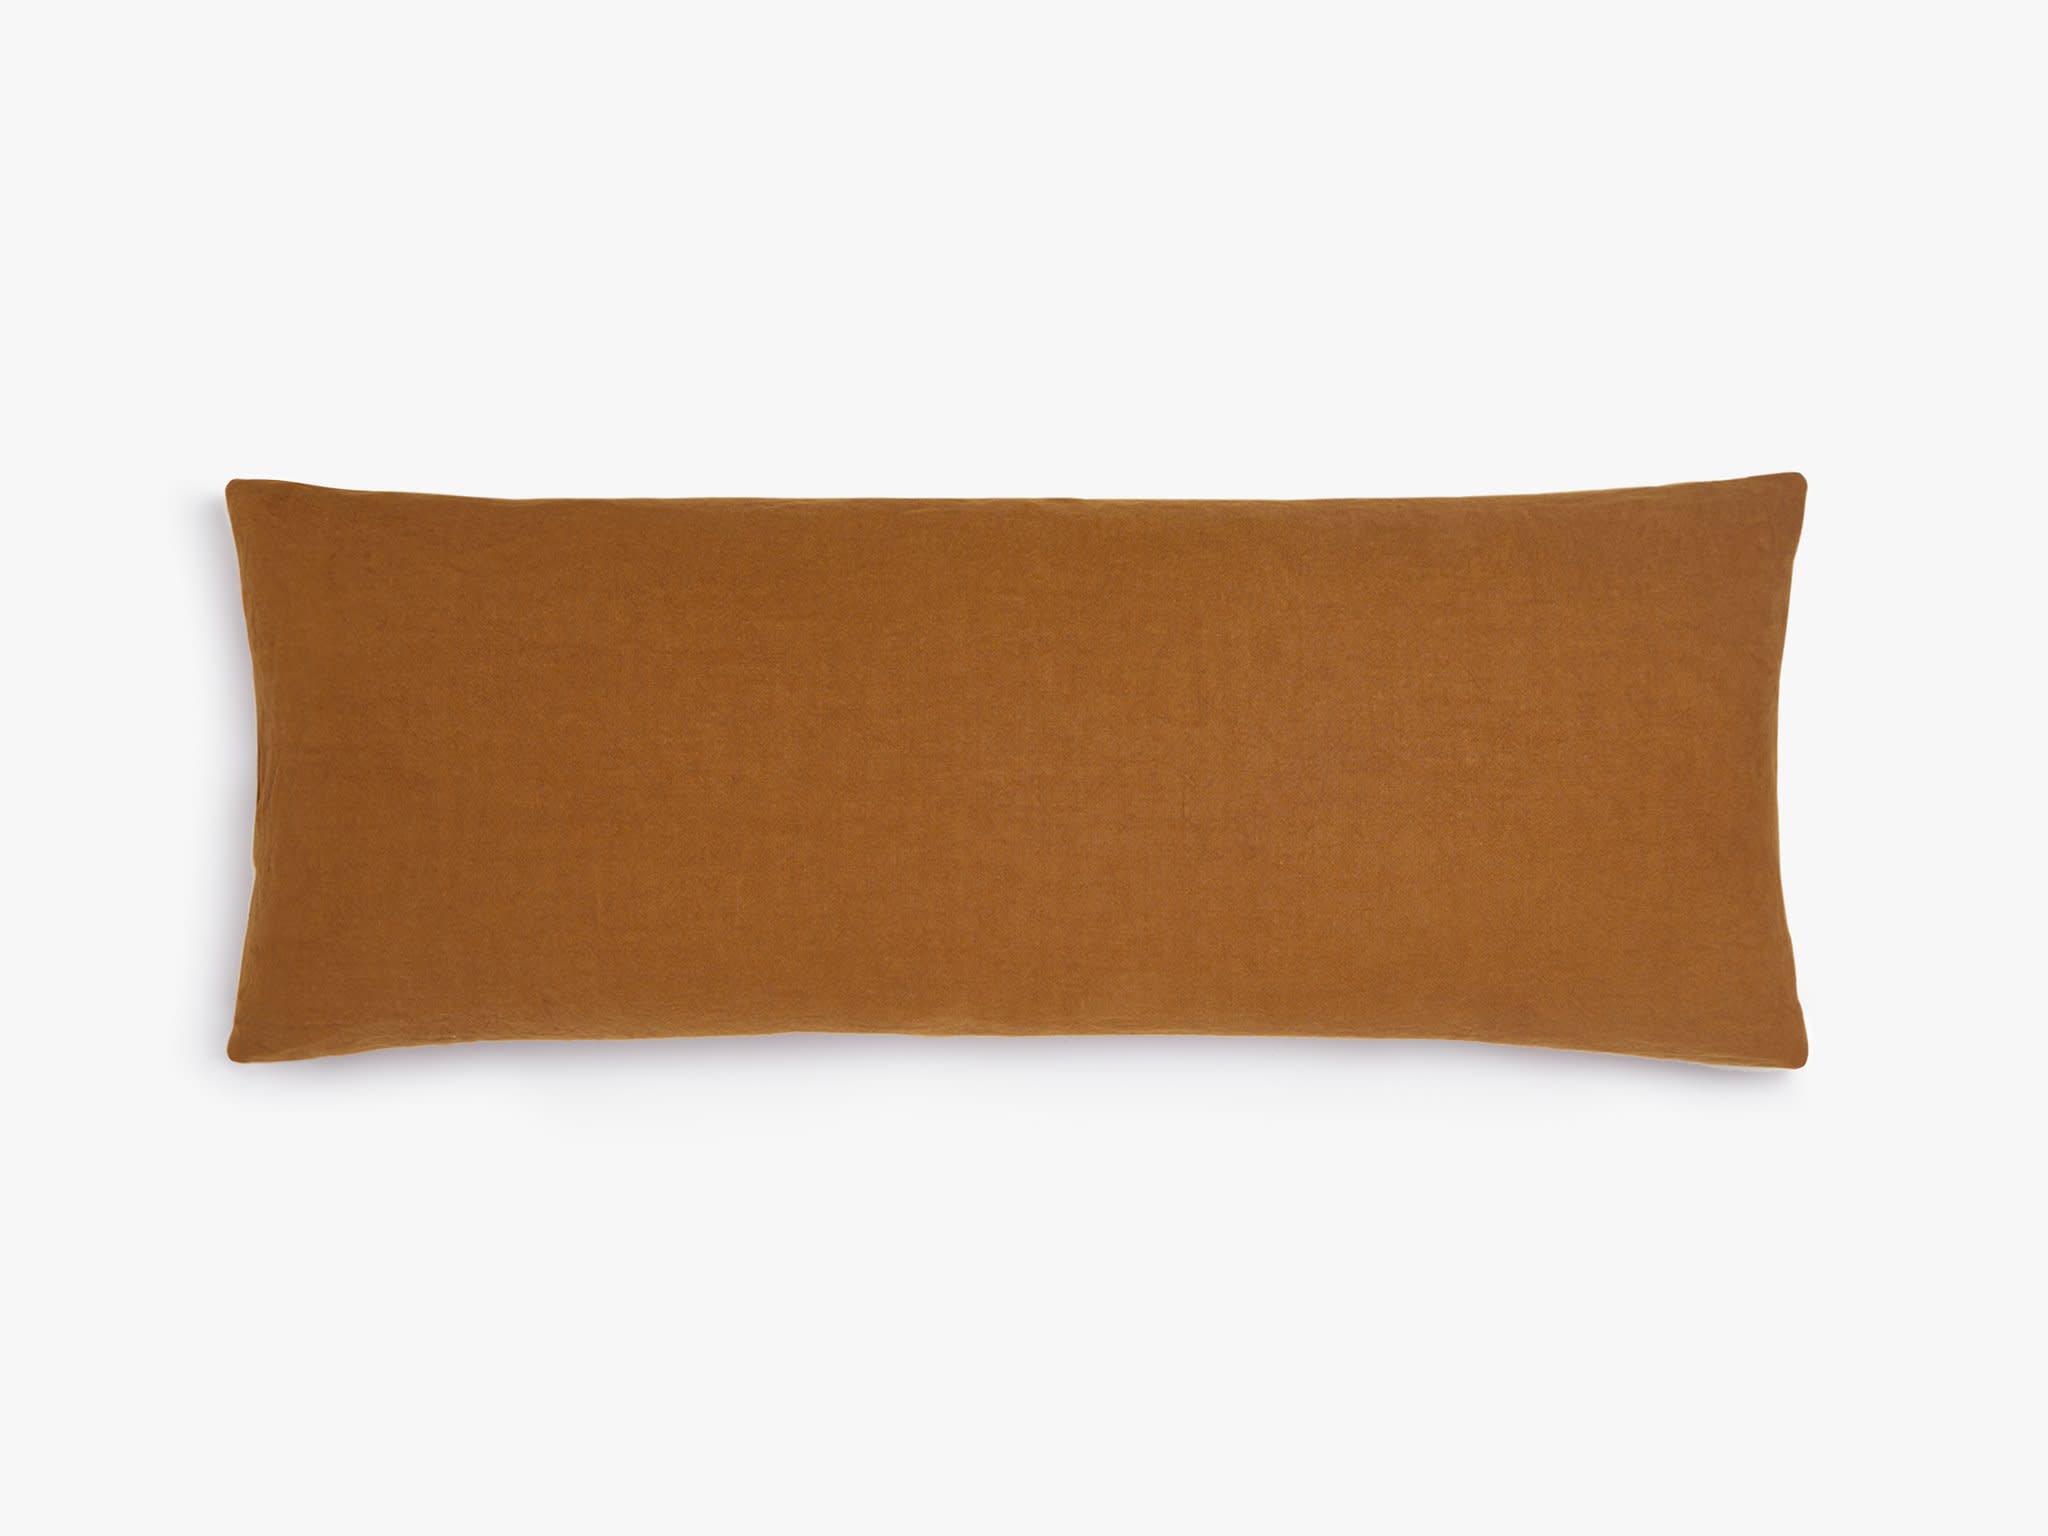 Sienna Vintage Linen Body Pillow Cover Product Image